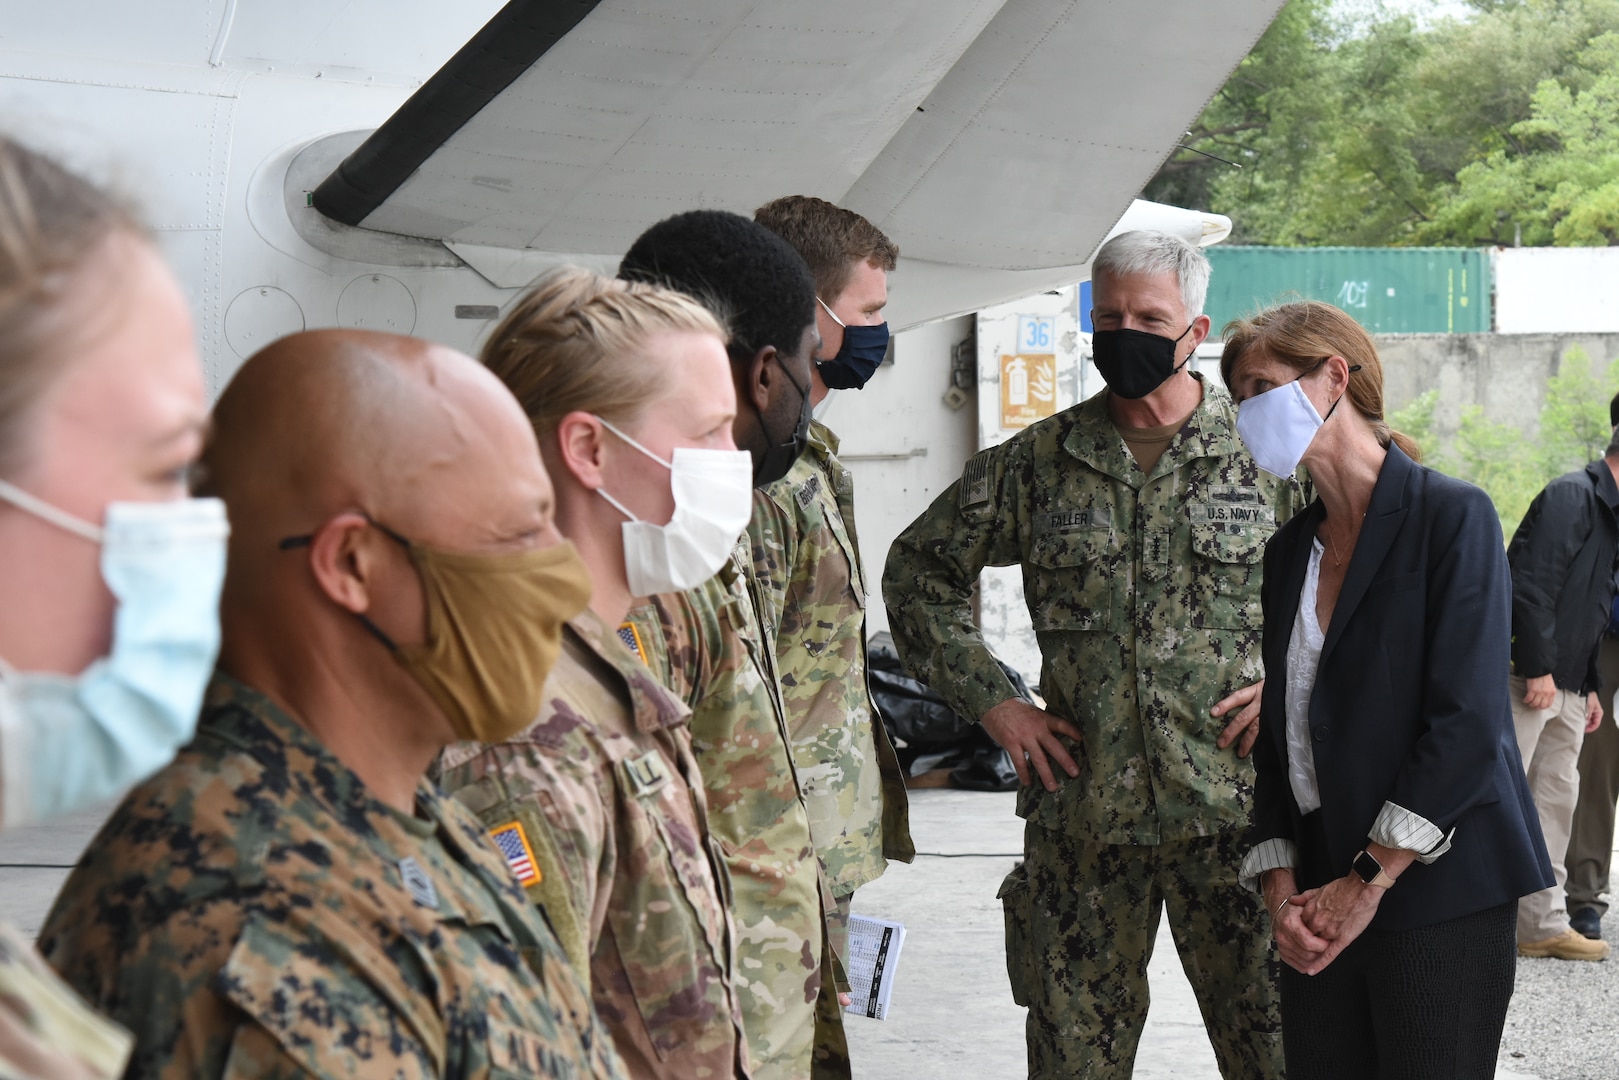 Adm. Craig Faller, Commander of U.S. Southern Command, and Administrator Samantha Power with United States Agency for International Development, speak with soldiers from Joint Task Force-Haiti in Port-au-Prince, Haiti Aug. 26, 2021.